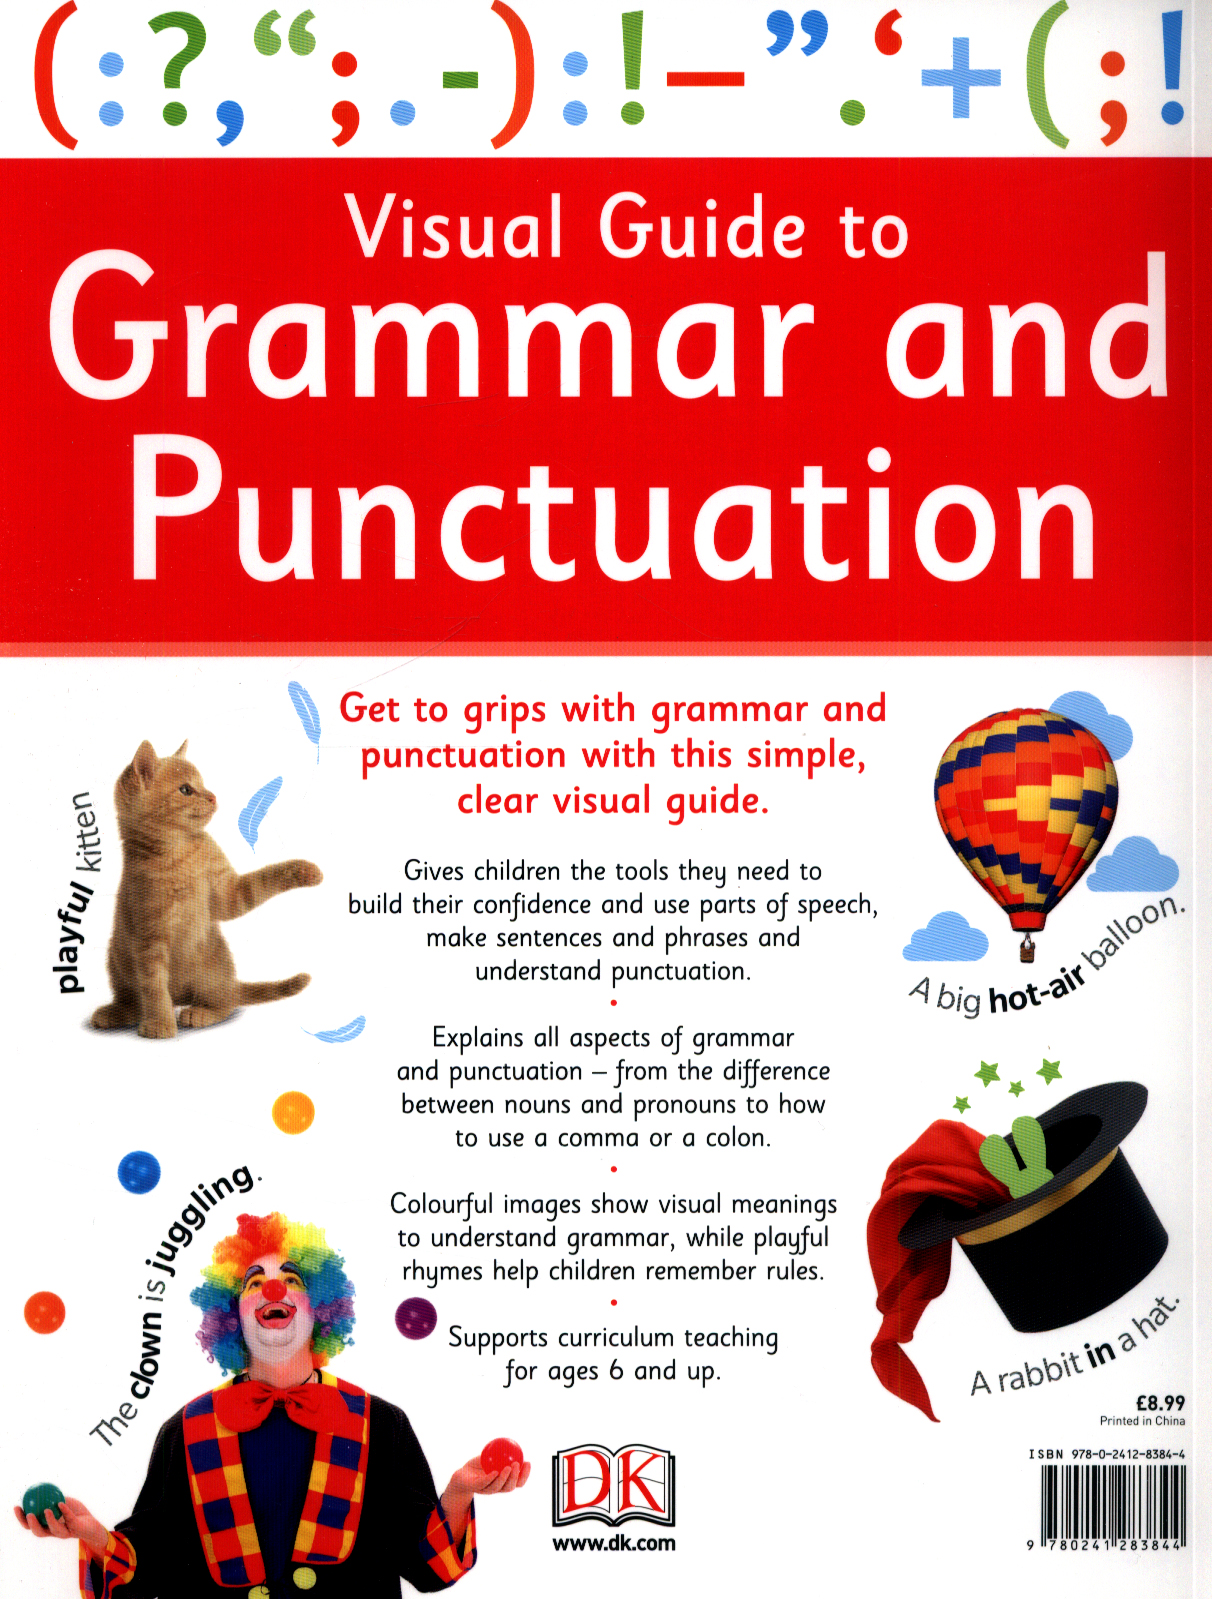 Visual guide to grammar and punctuation by DK (9780241283844) | BrownsBfS